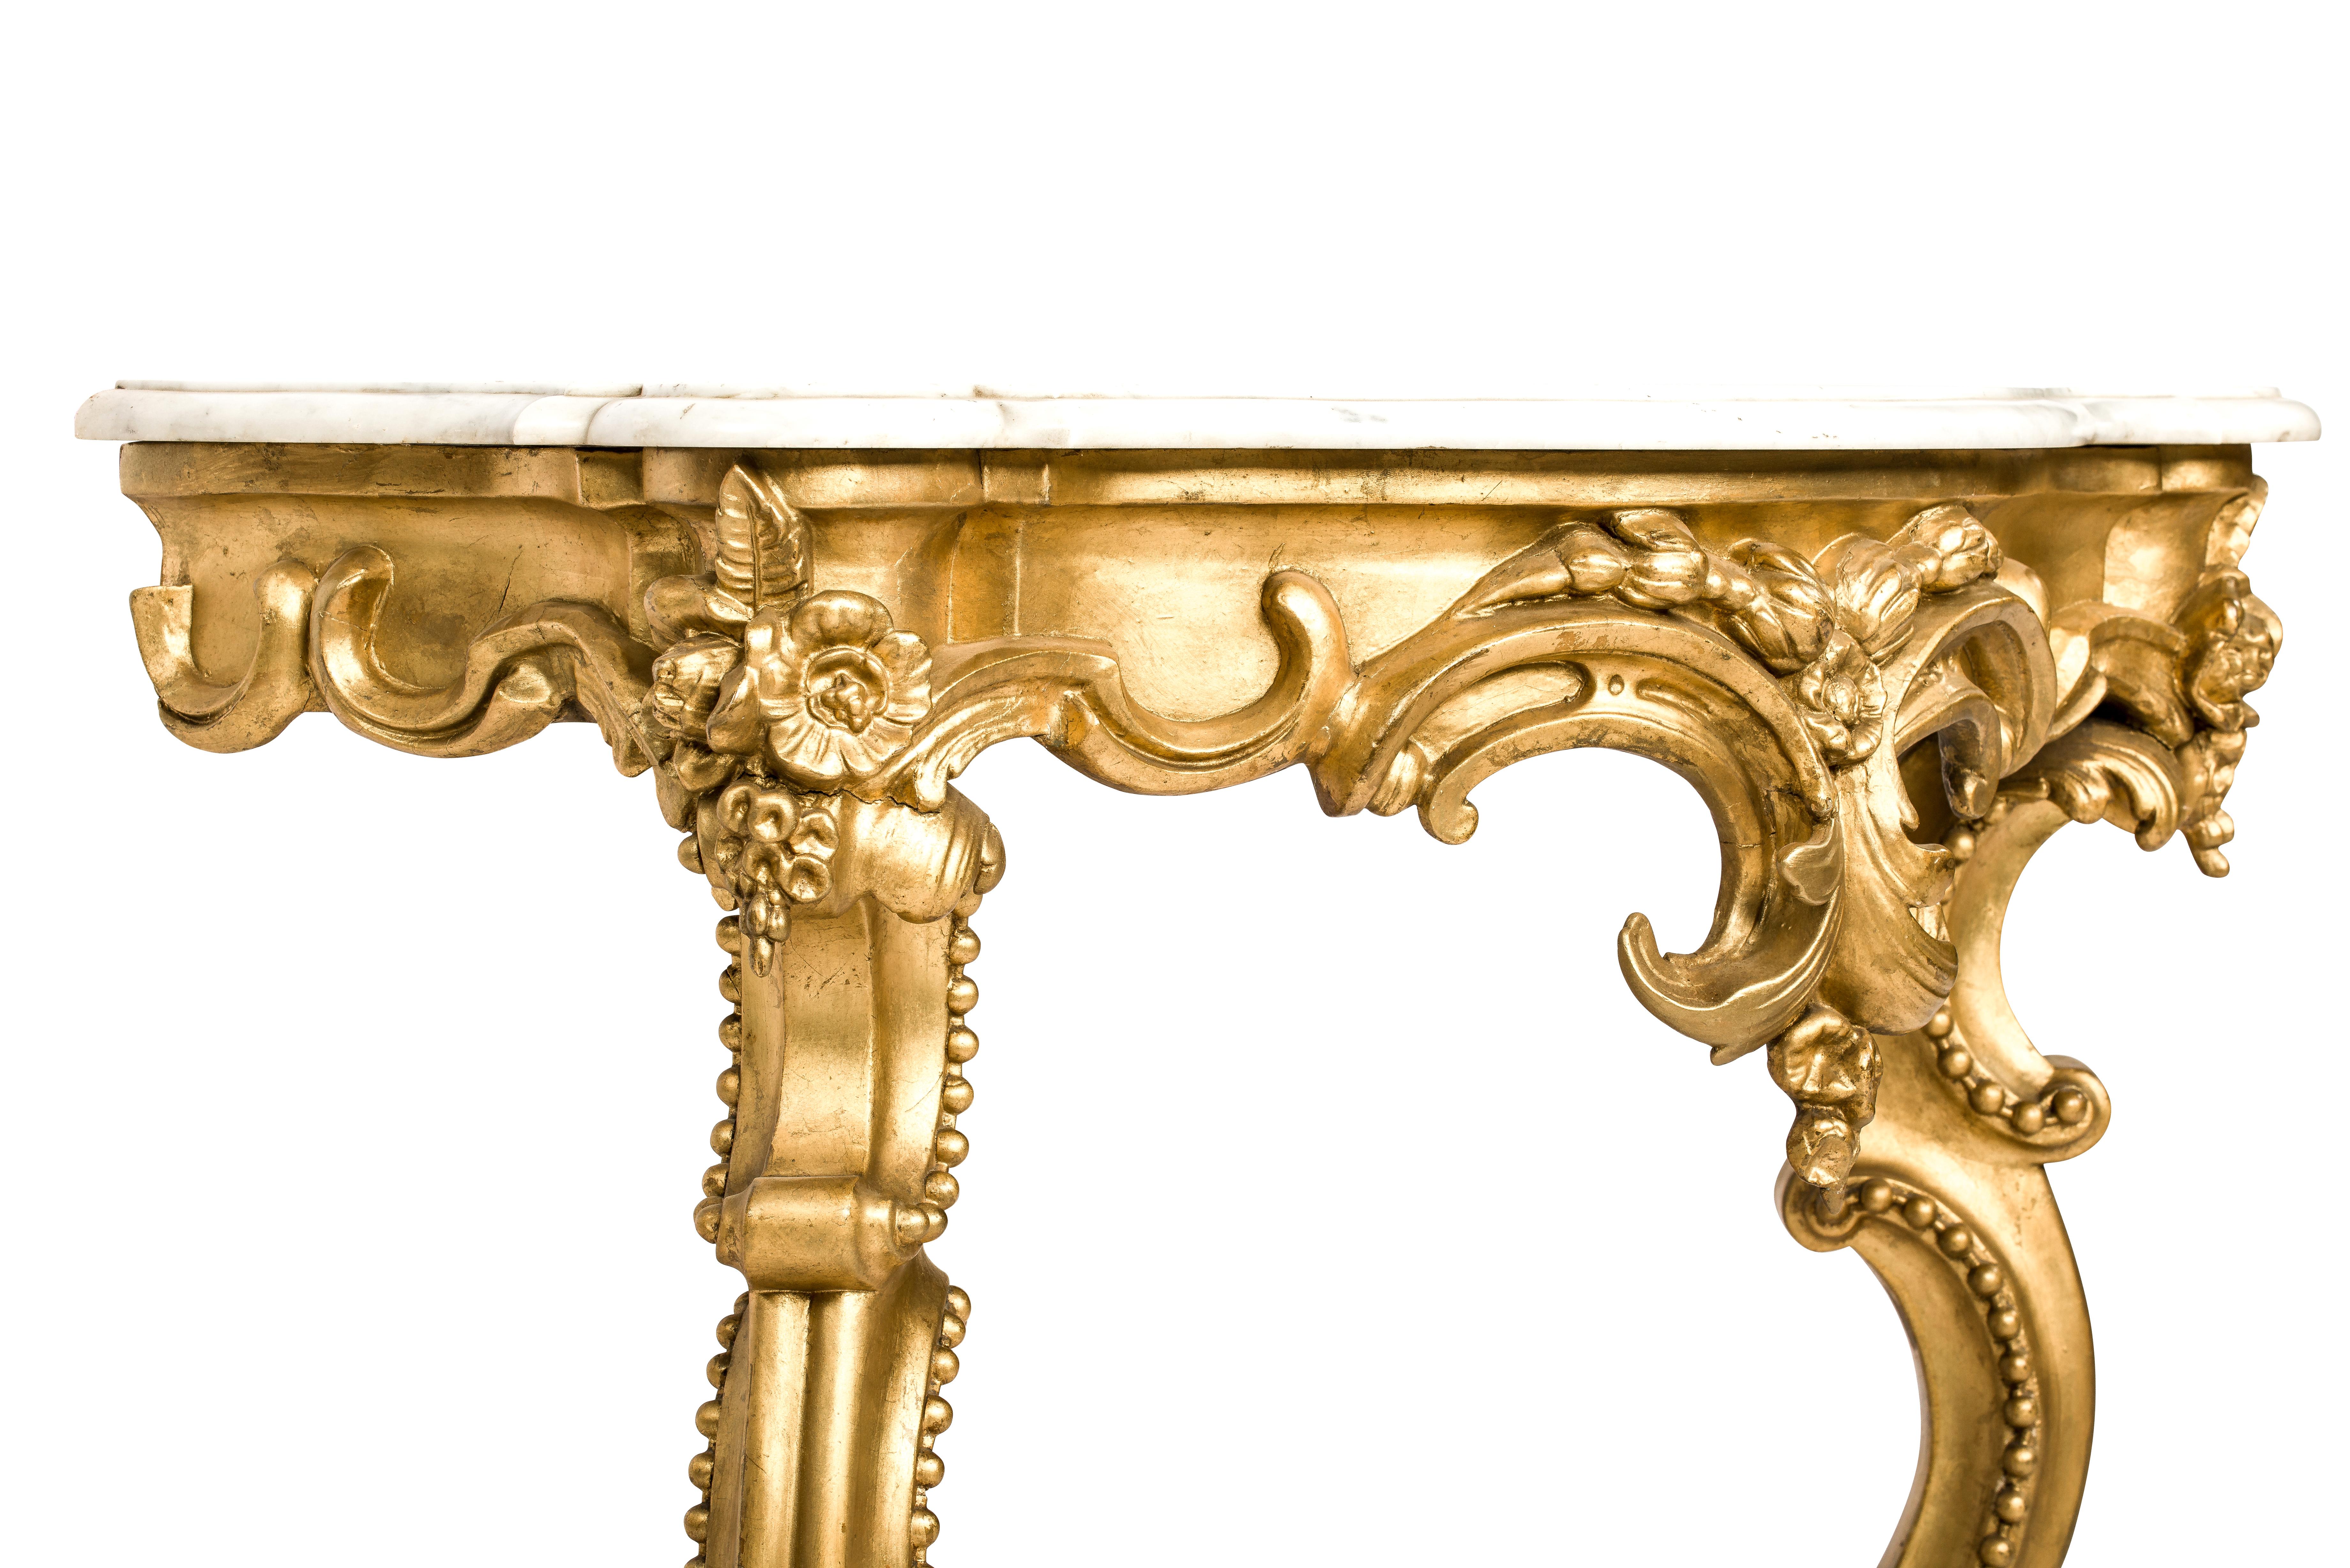 19th Century Antique 19th century French Gold Leaf Gilt Baroque Console Table with Marble Top